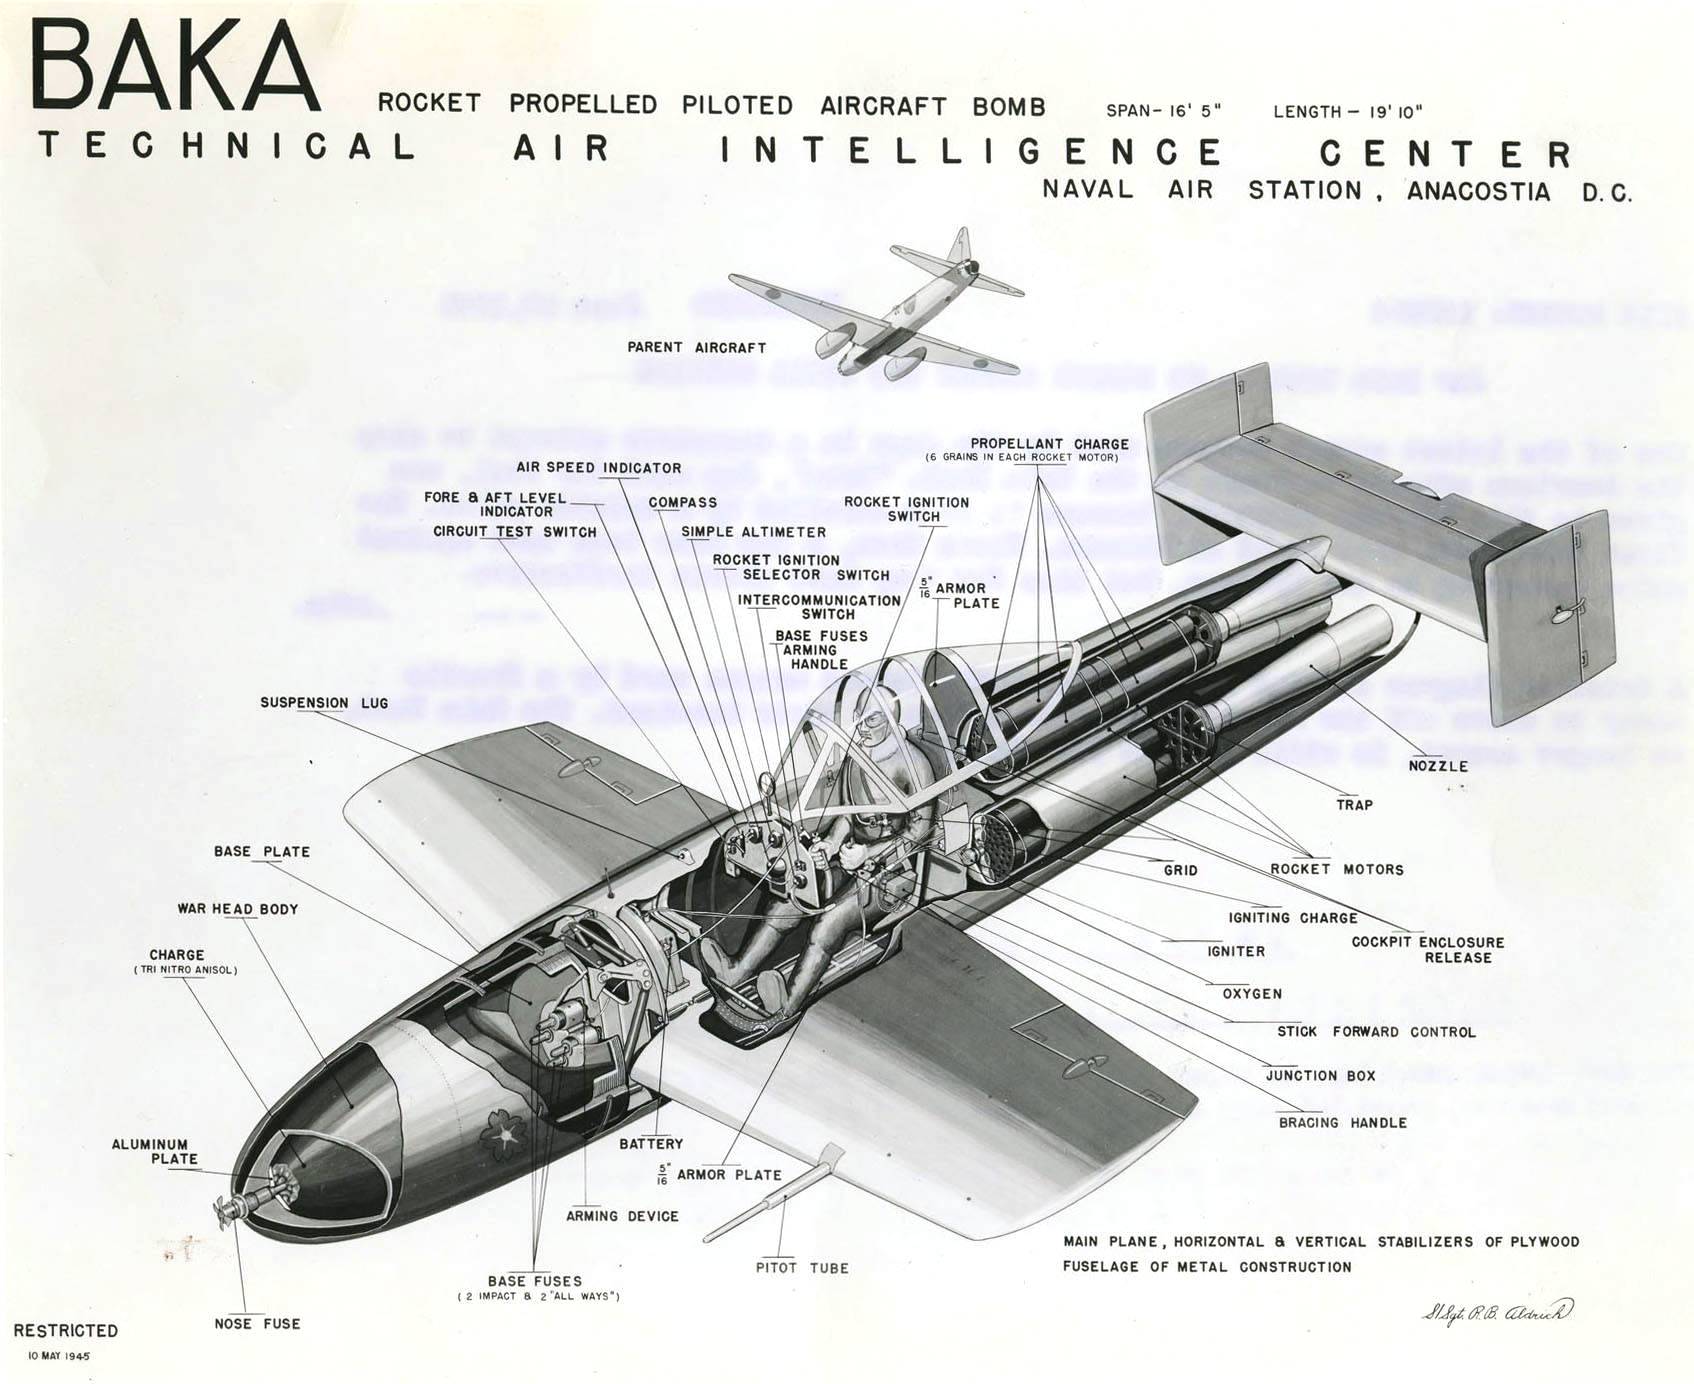 United States intelligence schematic of the Japanese MXY7 Ohka “Baka” bomb published 10 May 1945, just five weeks after the weapon’s discovery on Okinawa.